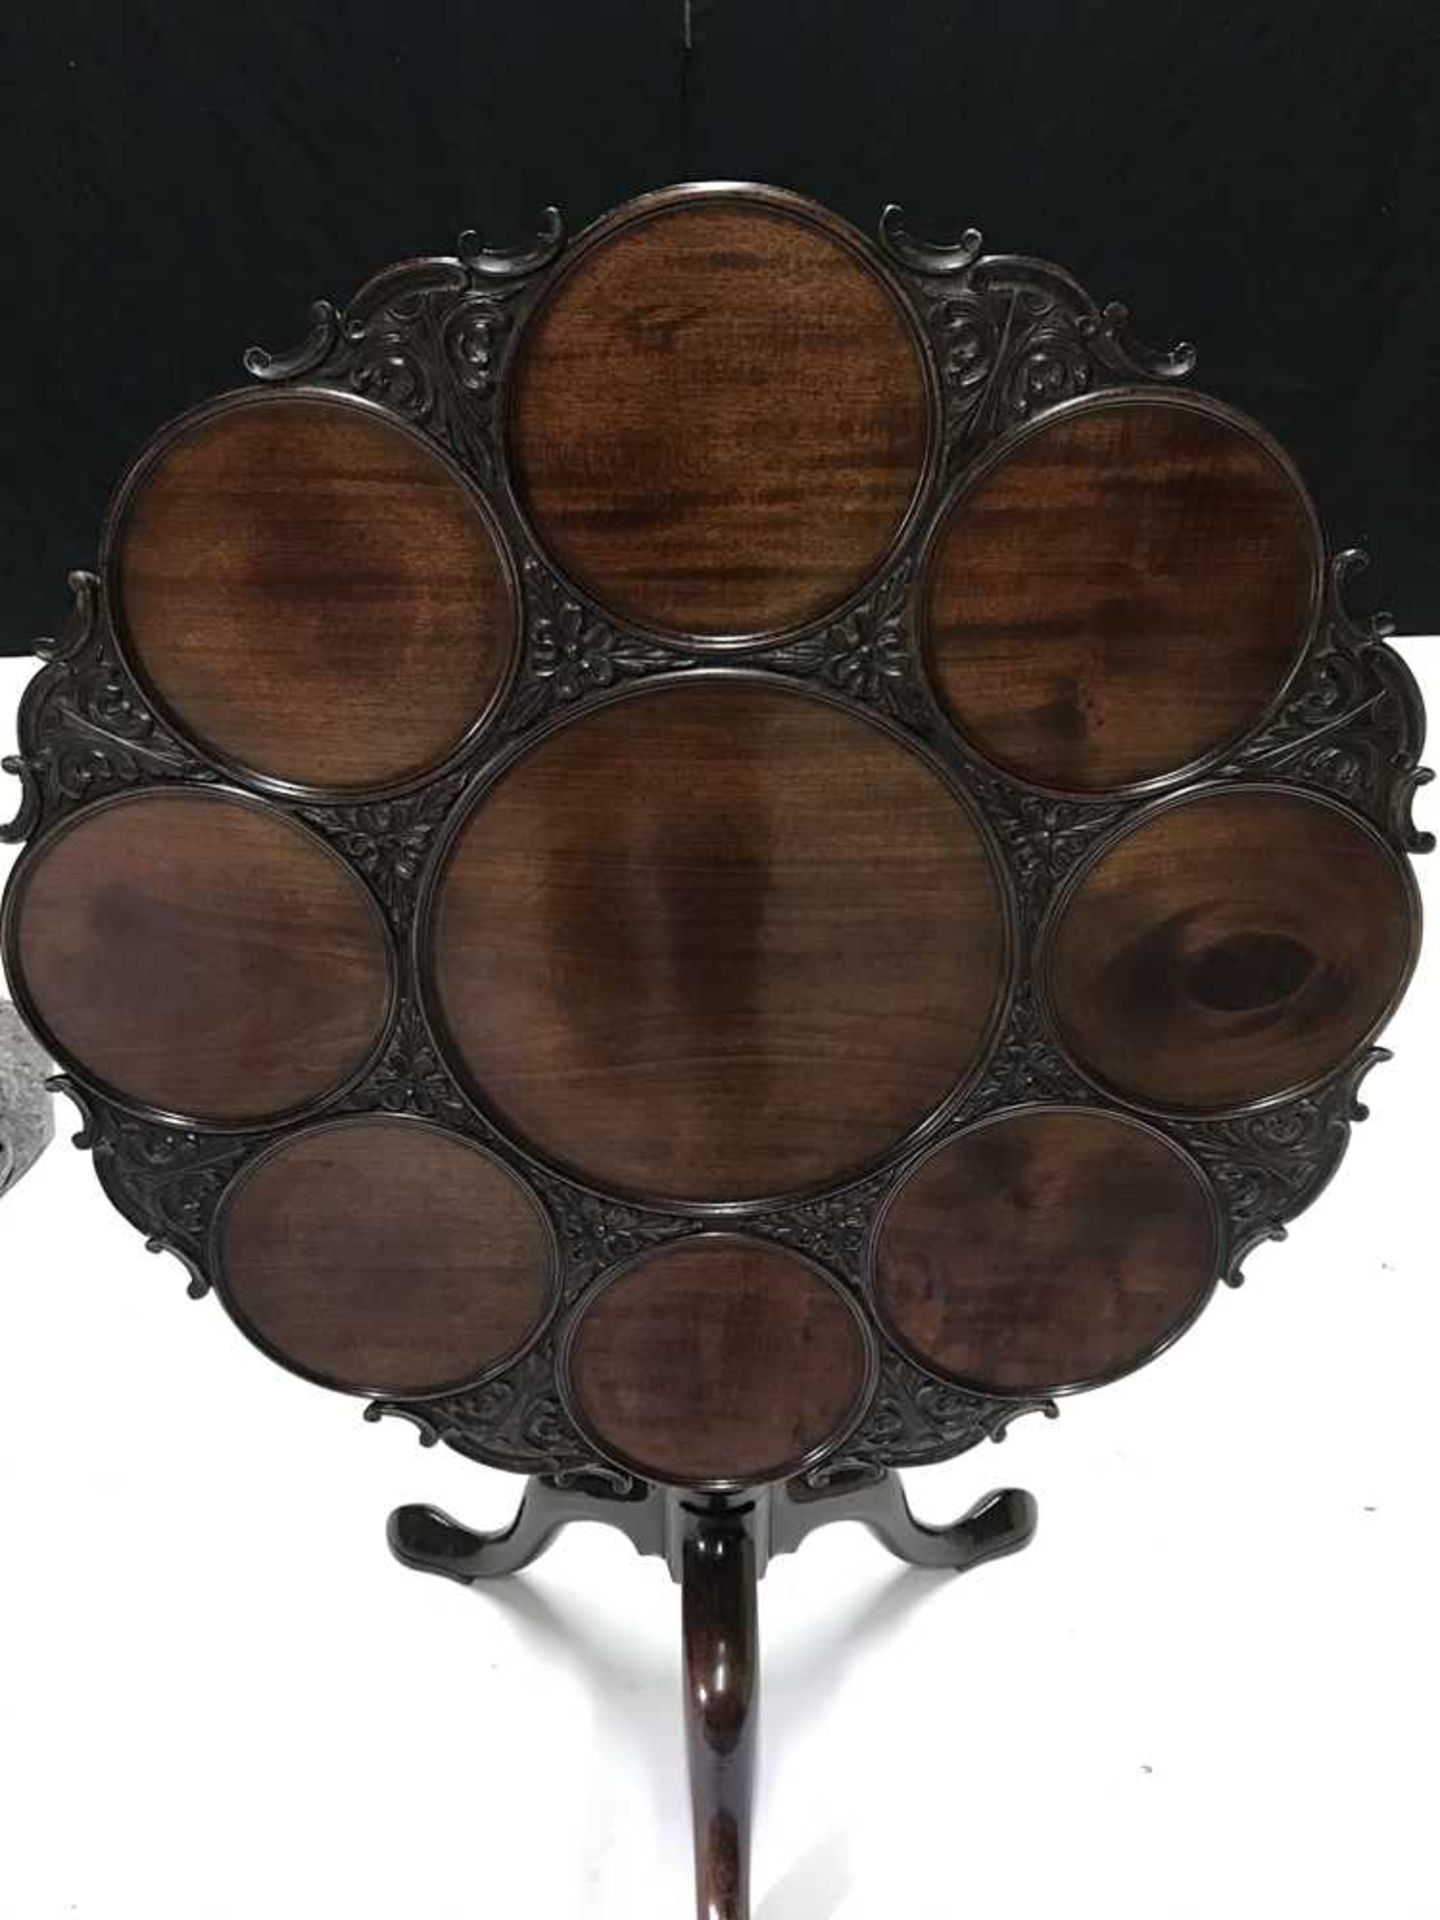 GEORGE III MAHOGANY CARVED BIRDCAGE SUPPER TABLE MID 18TH CENTURY - Image 3 of 8